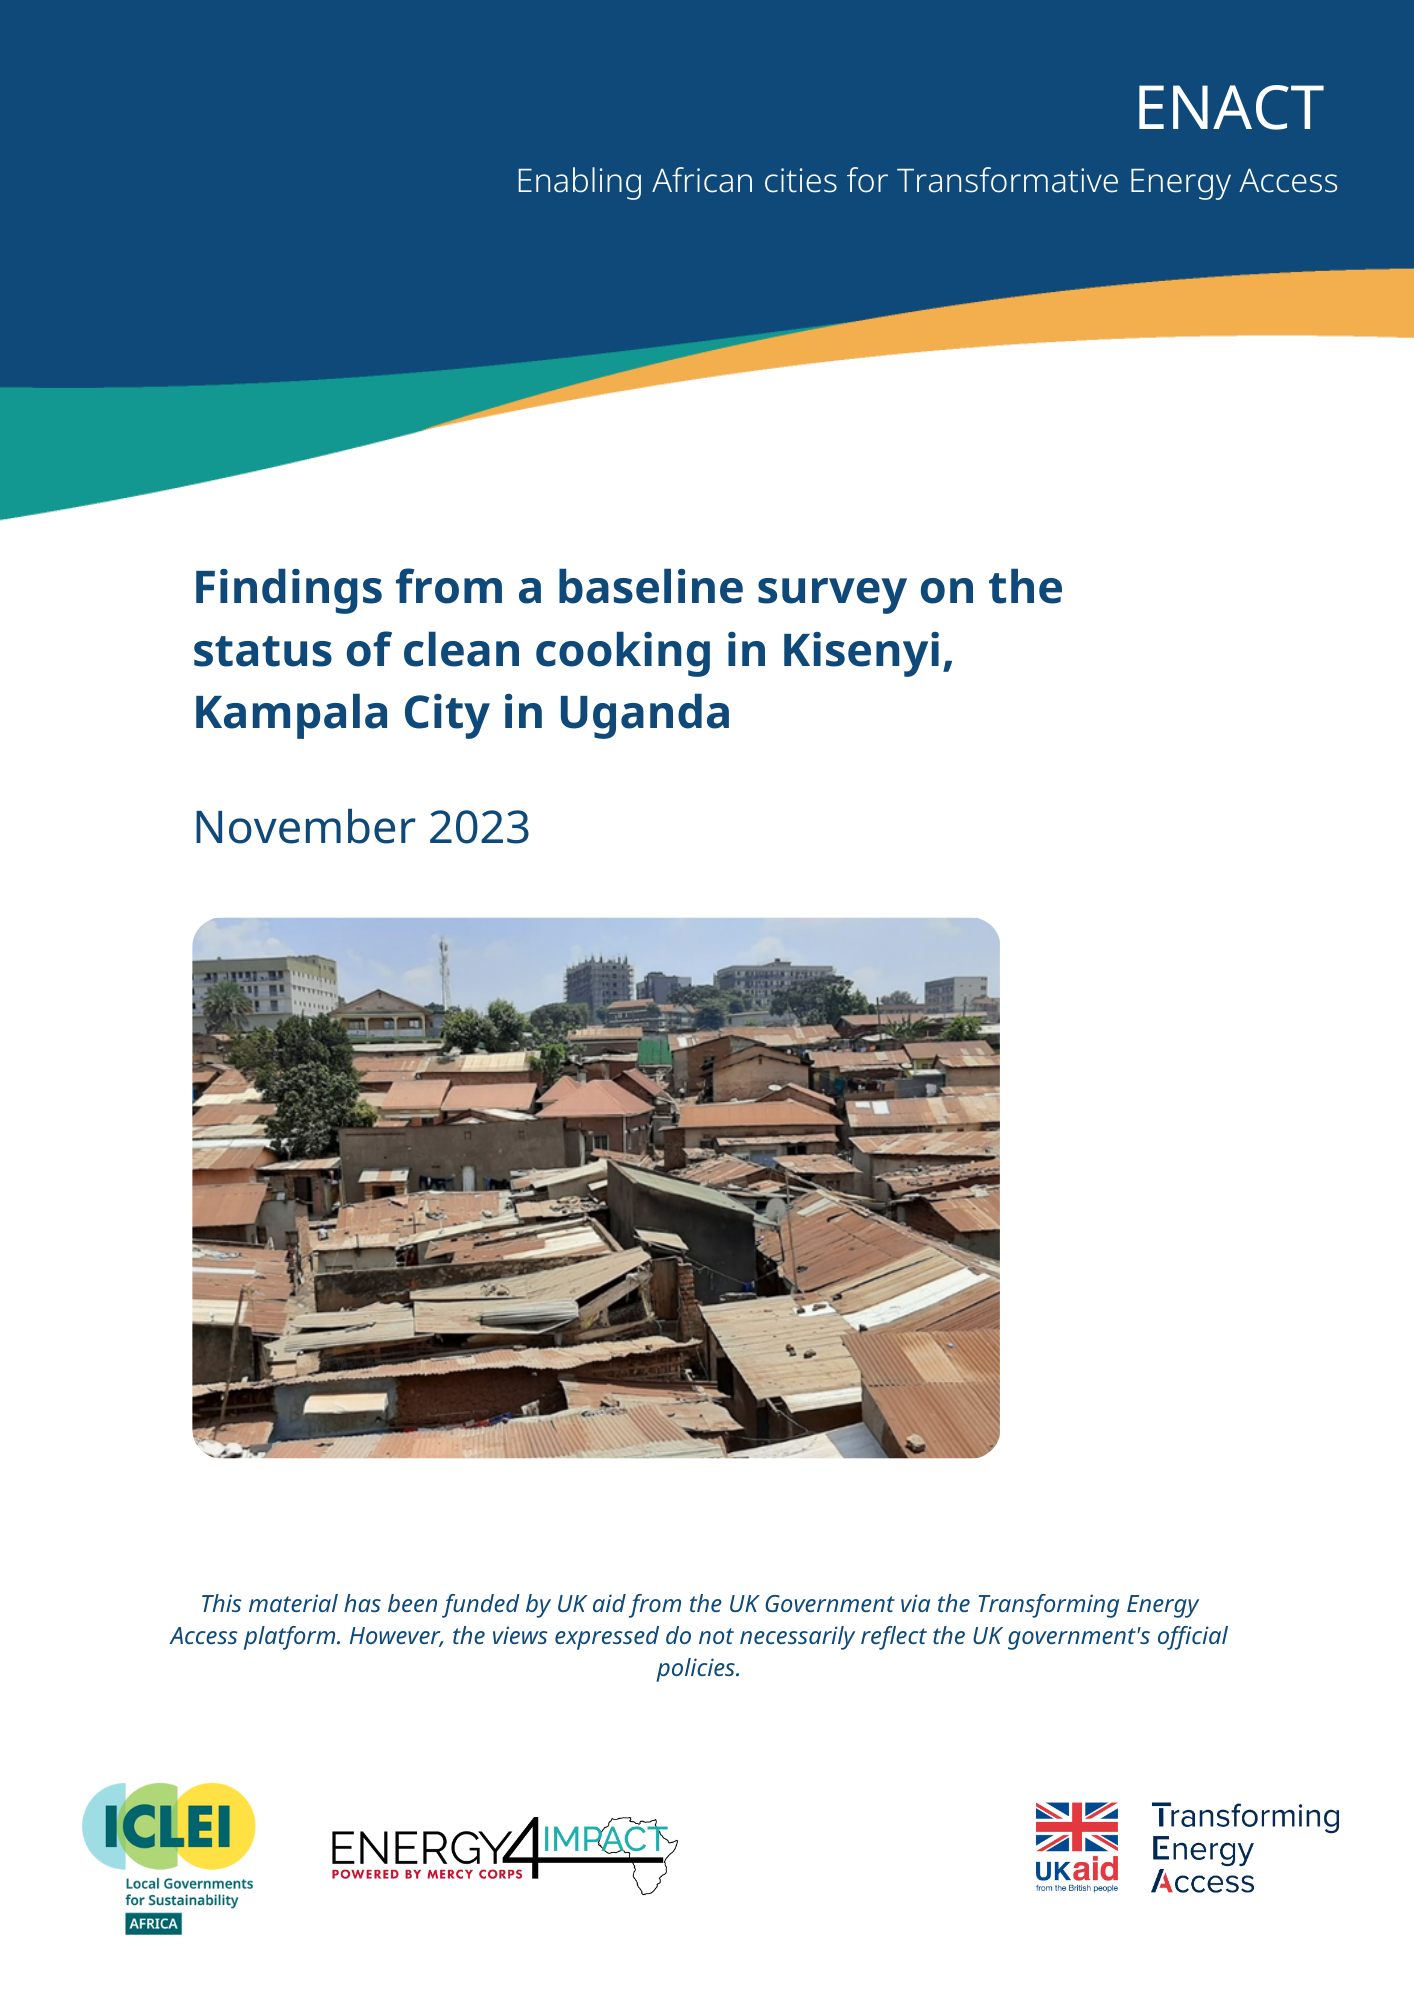 Findings from a baseline survey on the status of clean cooking in Kisenyi, Kampala City in Uganda